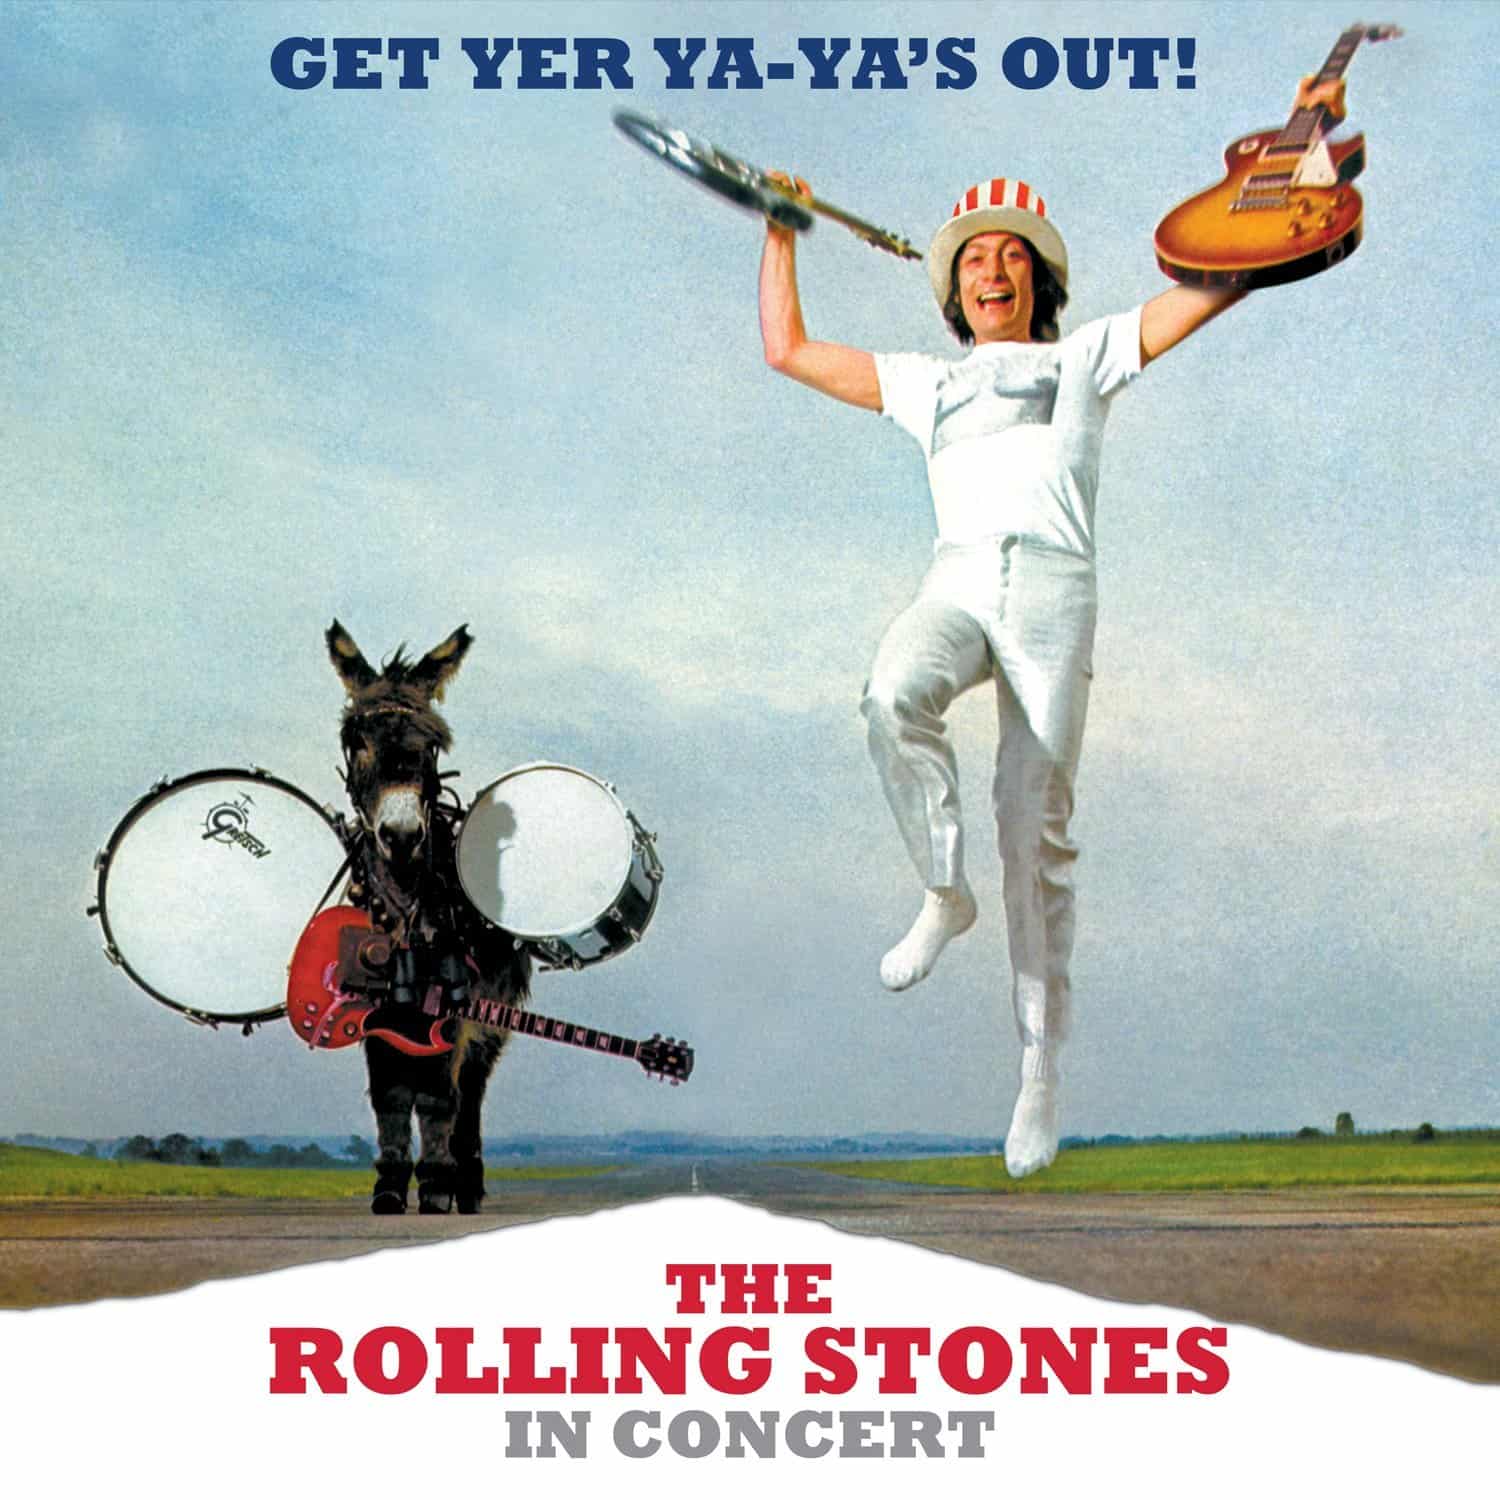 Rolling-Stones-Get-Your-Ya-Yas-Out-LP-vinyl-record-album-front